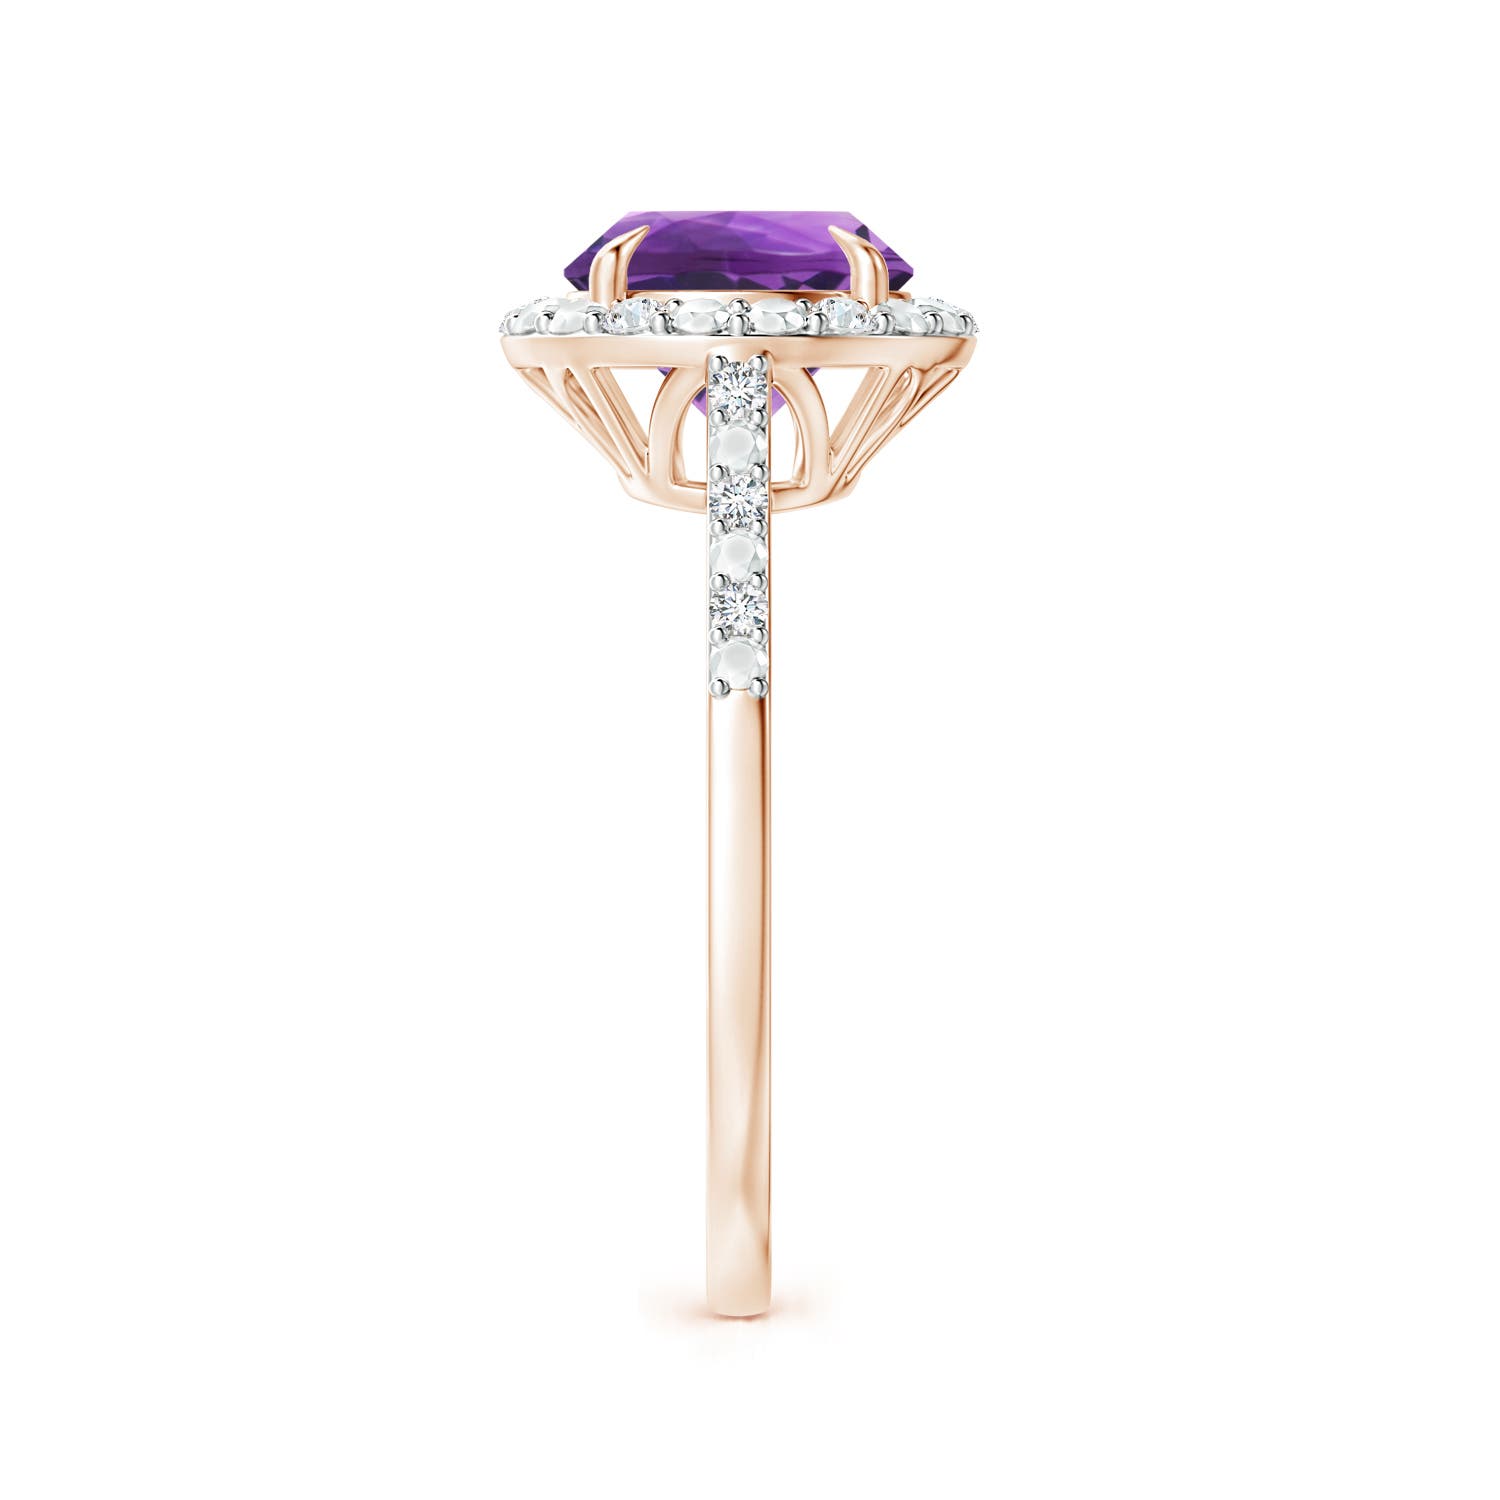 AAA - Amethyst / 1.82 CT / 14 KT Rose Gold